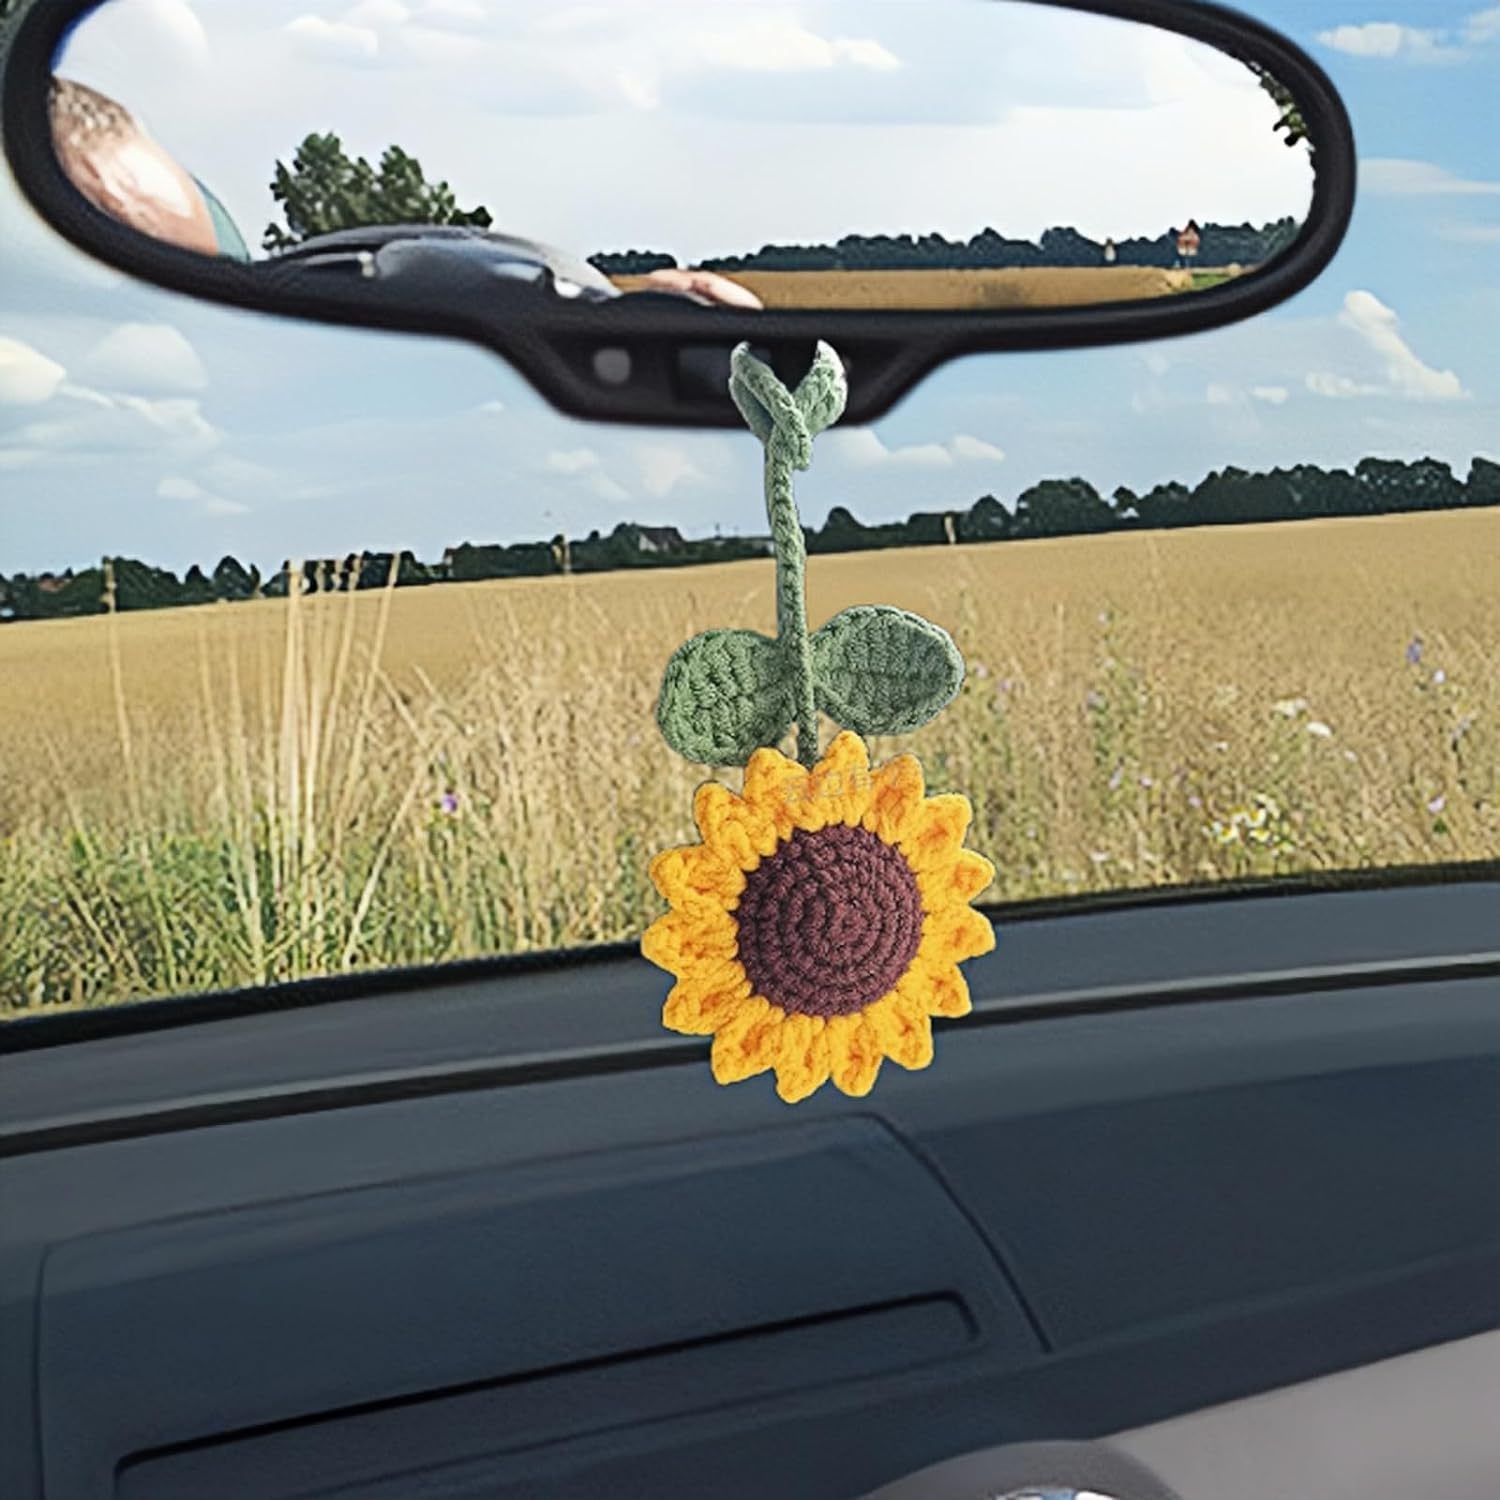 

Sunflower Car Rearview Mirror Hanging Ornament Floral Crochet Rearview Mirror Decor Car Accessories Cute Handmade Gifts For Women And Men Drivers